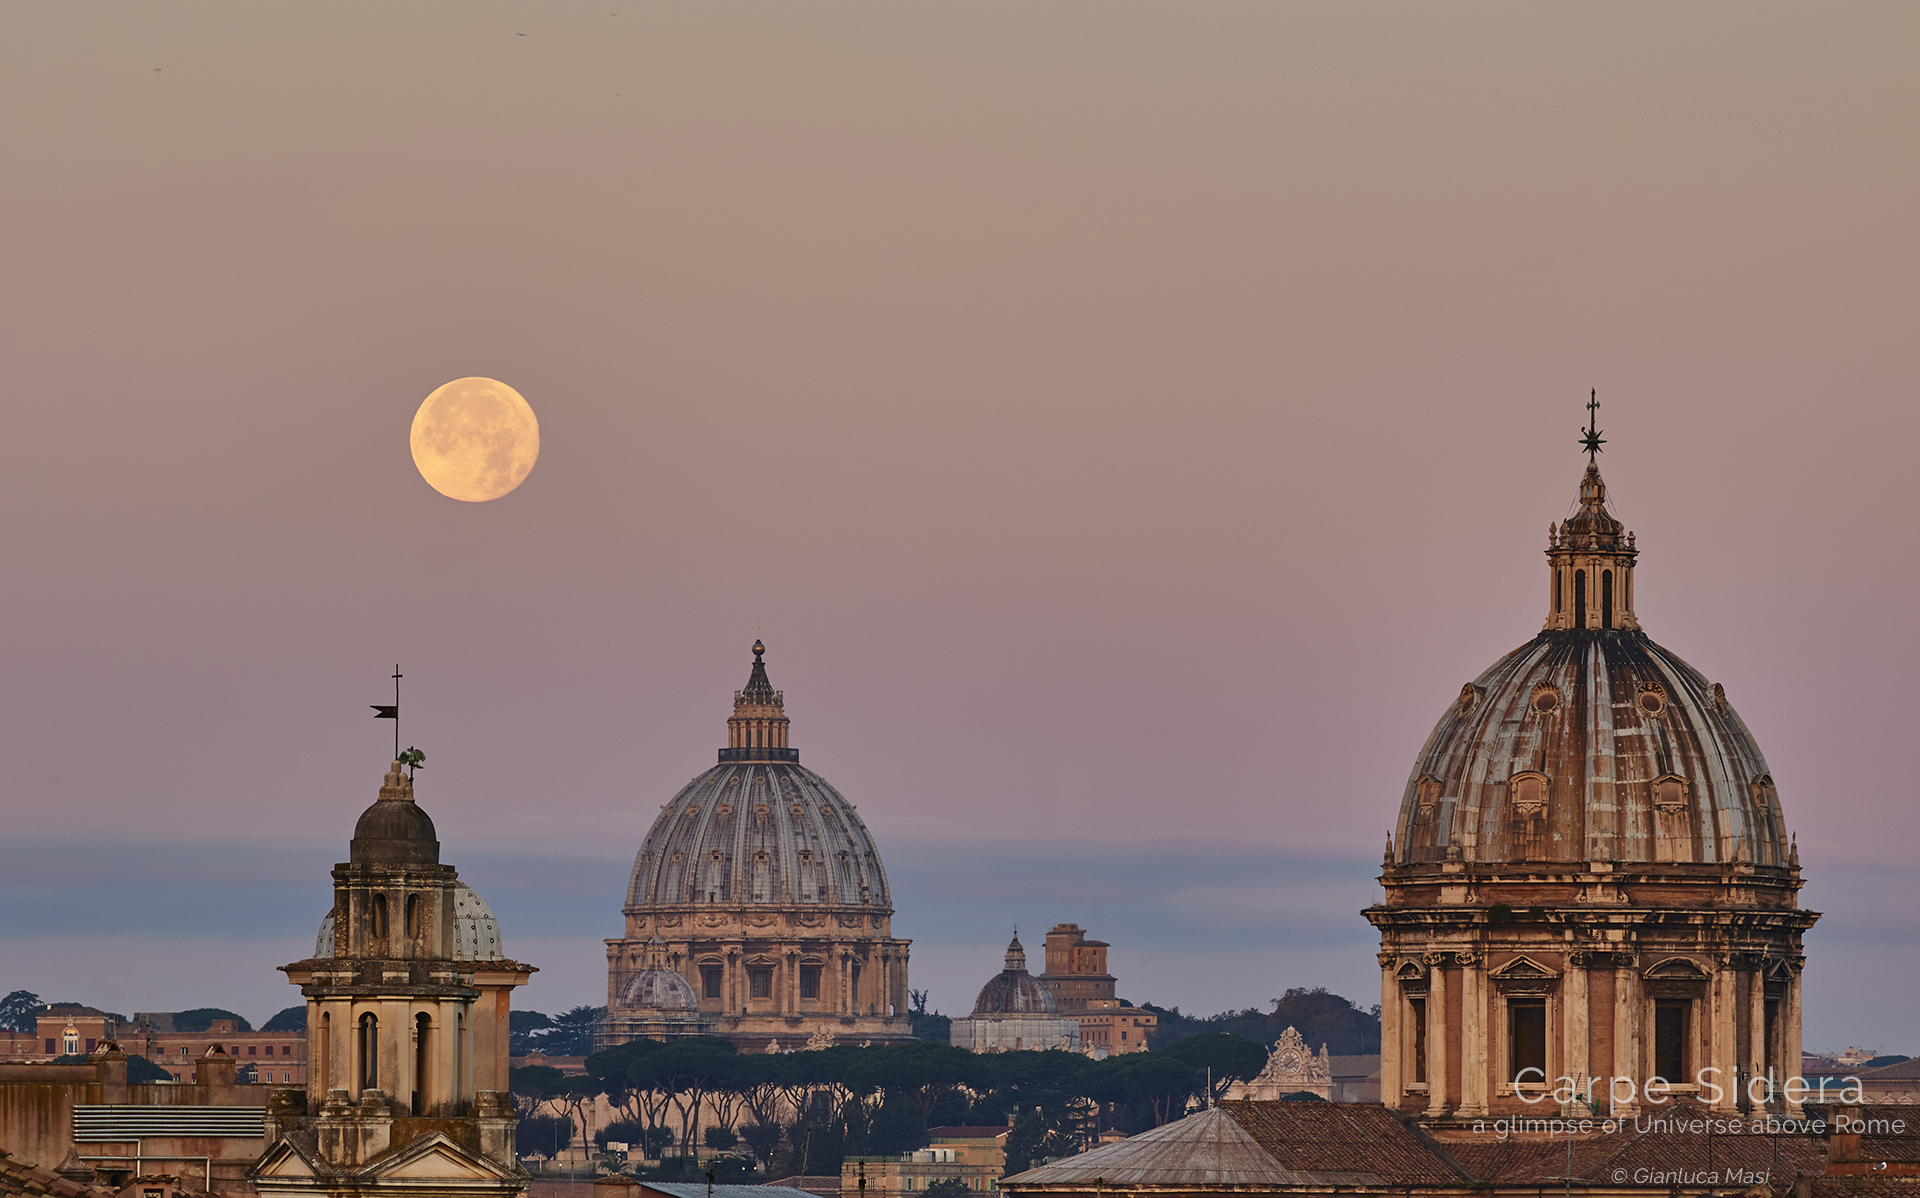 The Supermoon sets beside St. Peter's Dome, at dawn